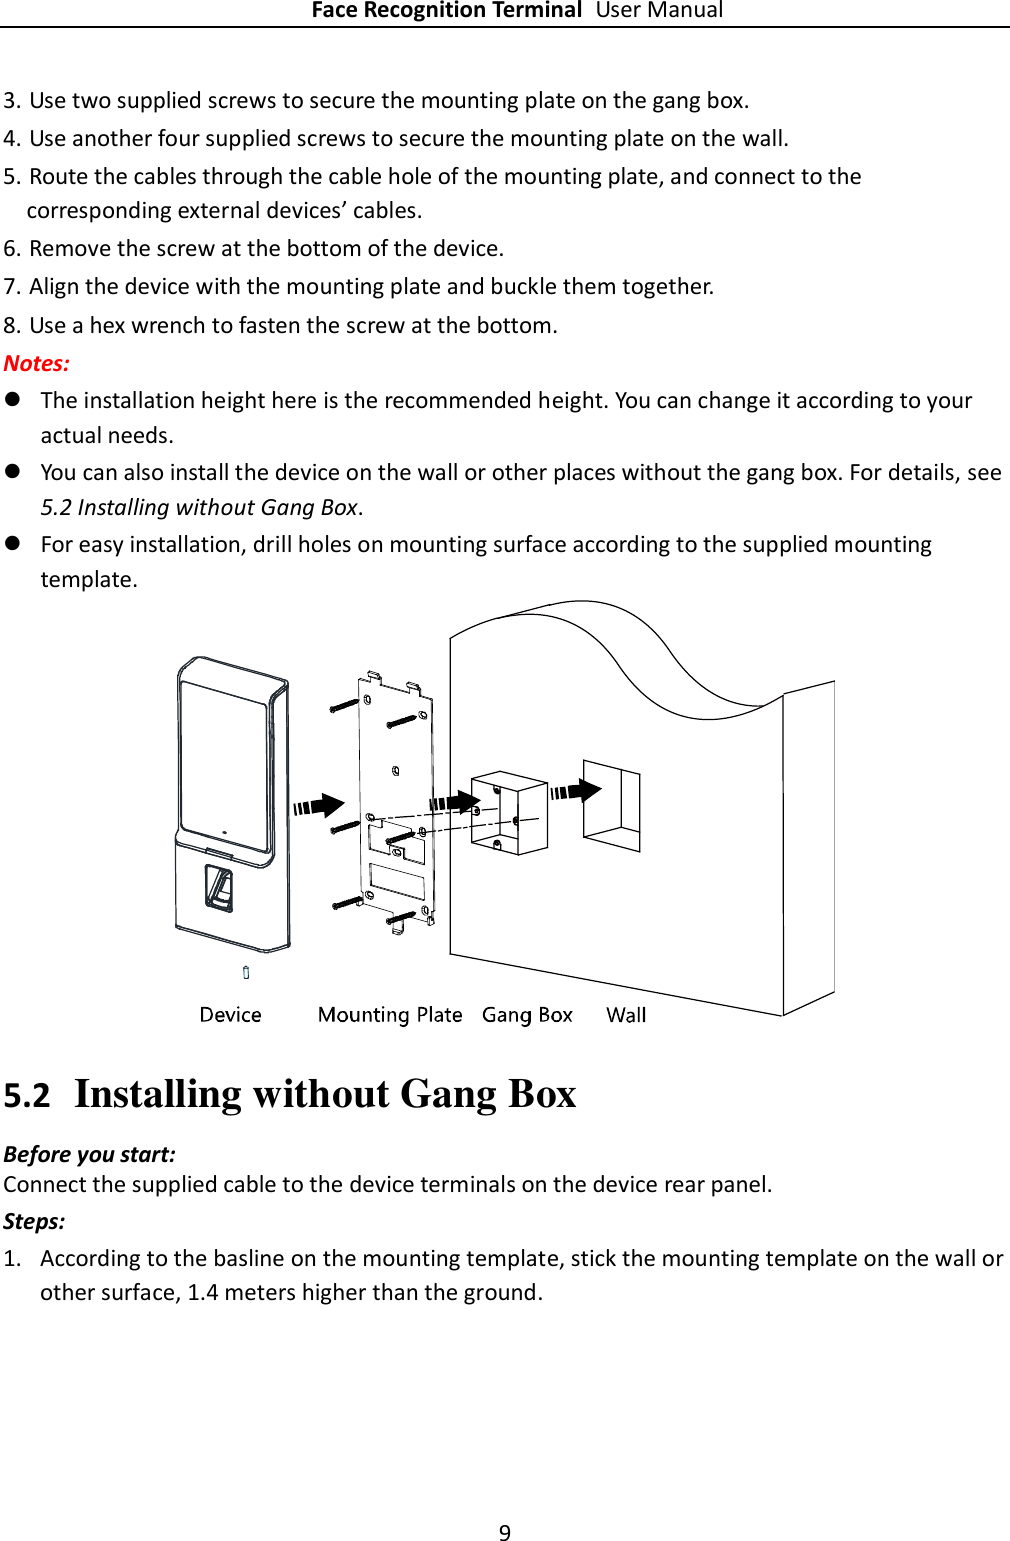 Face Recognition Terminal User Manual 9  3. Use two supplied screws to secure the mounting plate on the gang box. 4. Use another four supplied screws to secure the mounting plate on the wall. 5. Route the cables through the cable hole of the mounting plate, and connect to the corresponding external devices’ cables. 6. Remove the screw at the bottom of the device. 7. Align the device with the mounting plate and buckle them together. 8. Use a hex wrench to fasten the screw at the bottom. Notes:  The installation height here is the recommended height. You can change it according to your actual needs.  You can also install the device on the wall or other places without the gang box. For details, see 5.2 Installing without Gang Box.  For easy installation, drill holes on mounting surface according to the supplied mounting template.  5.2 Installing without Gang Box Before you start: Connect the supplied cable to the device terminals on the device rear panel. Steps: 1. According to the basline on the mounting template, stick the mounting template on the wall or other surface, 1.4 meters higher than the ground. 